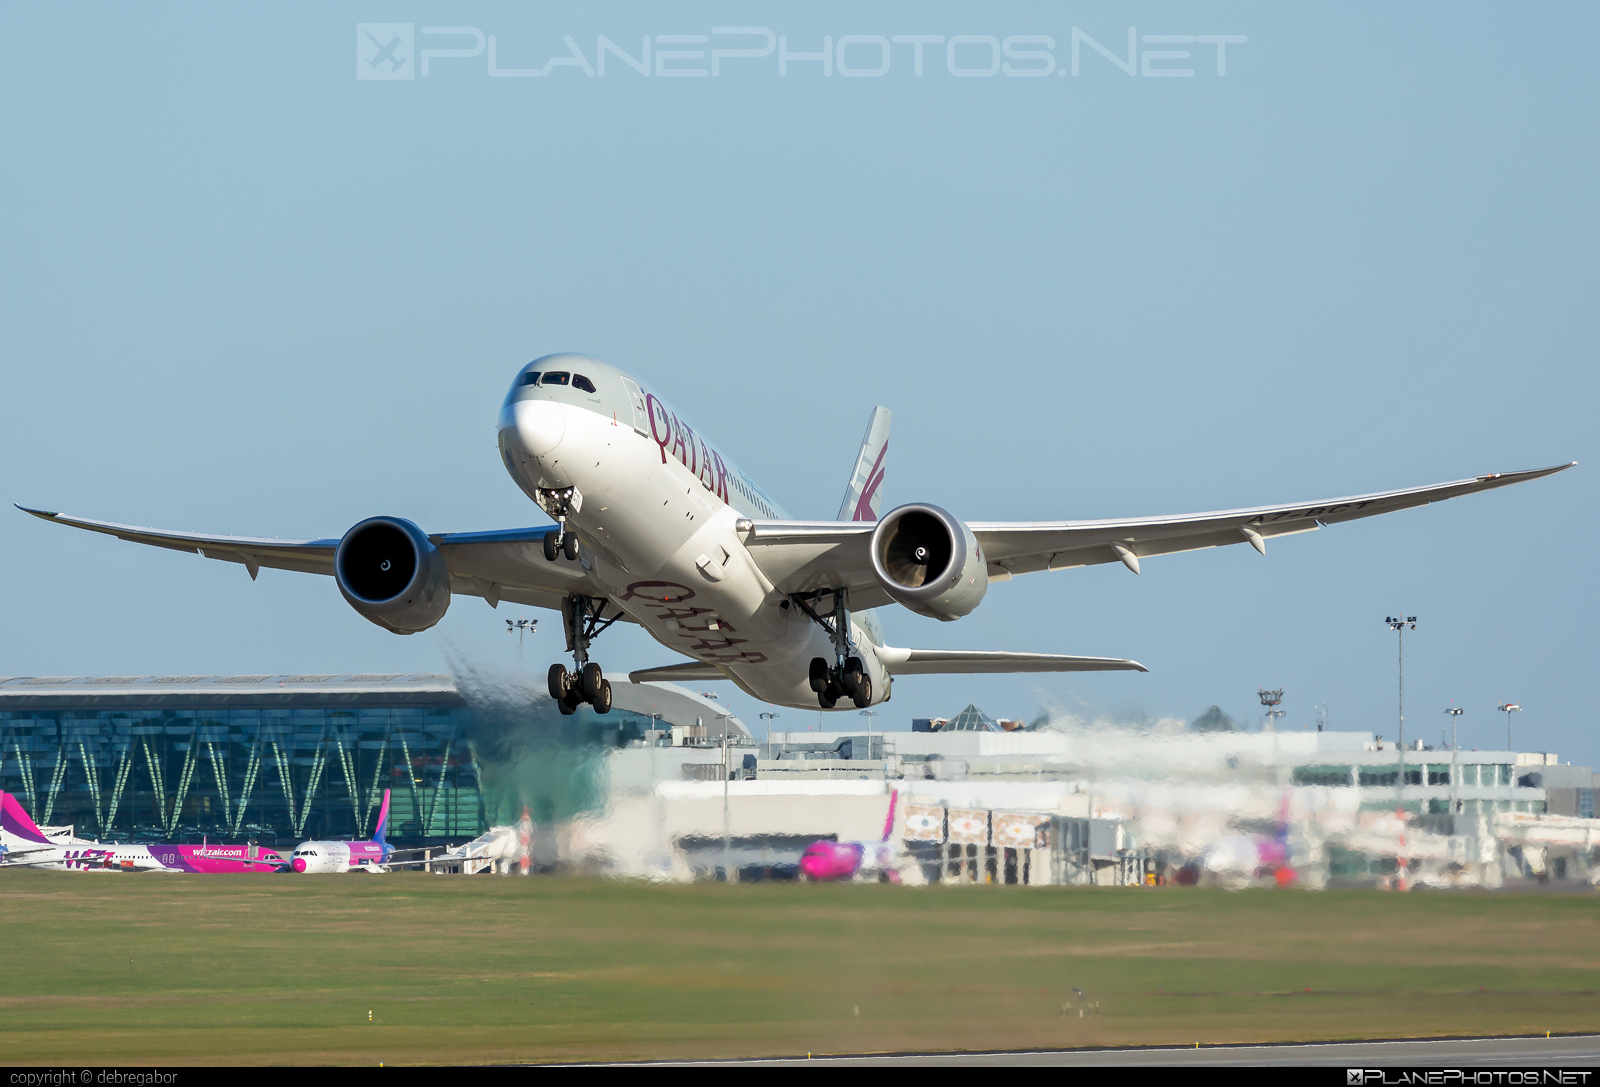 Boeing 787-8 Dreamliner - A7-BCT operated by Qatar Airways #b787 #boeing #boeing787 #dreamliner #qatarairways